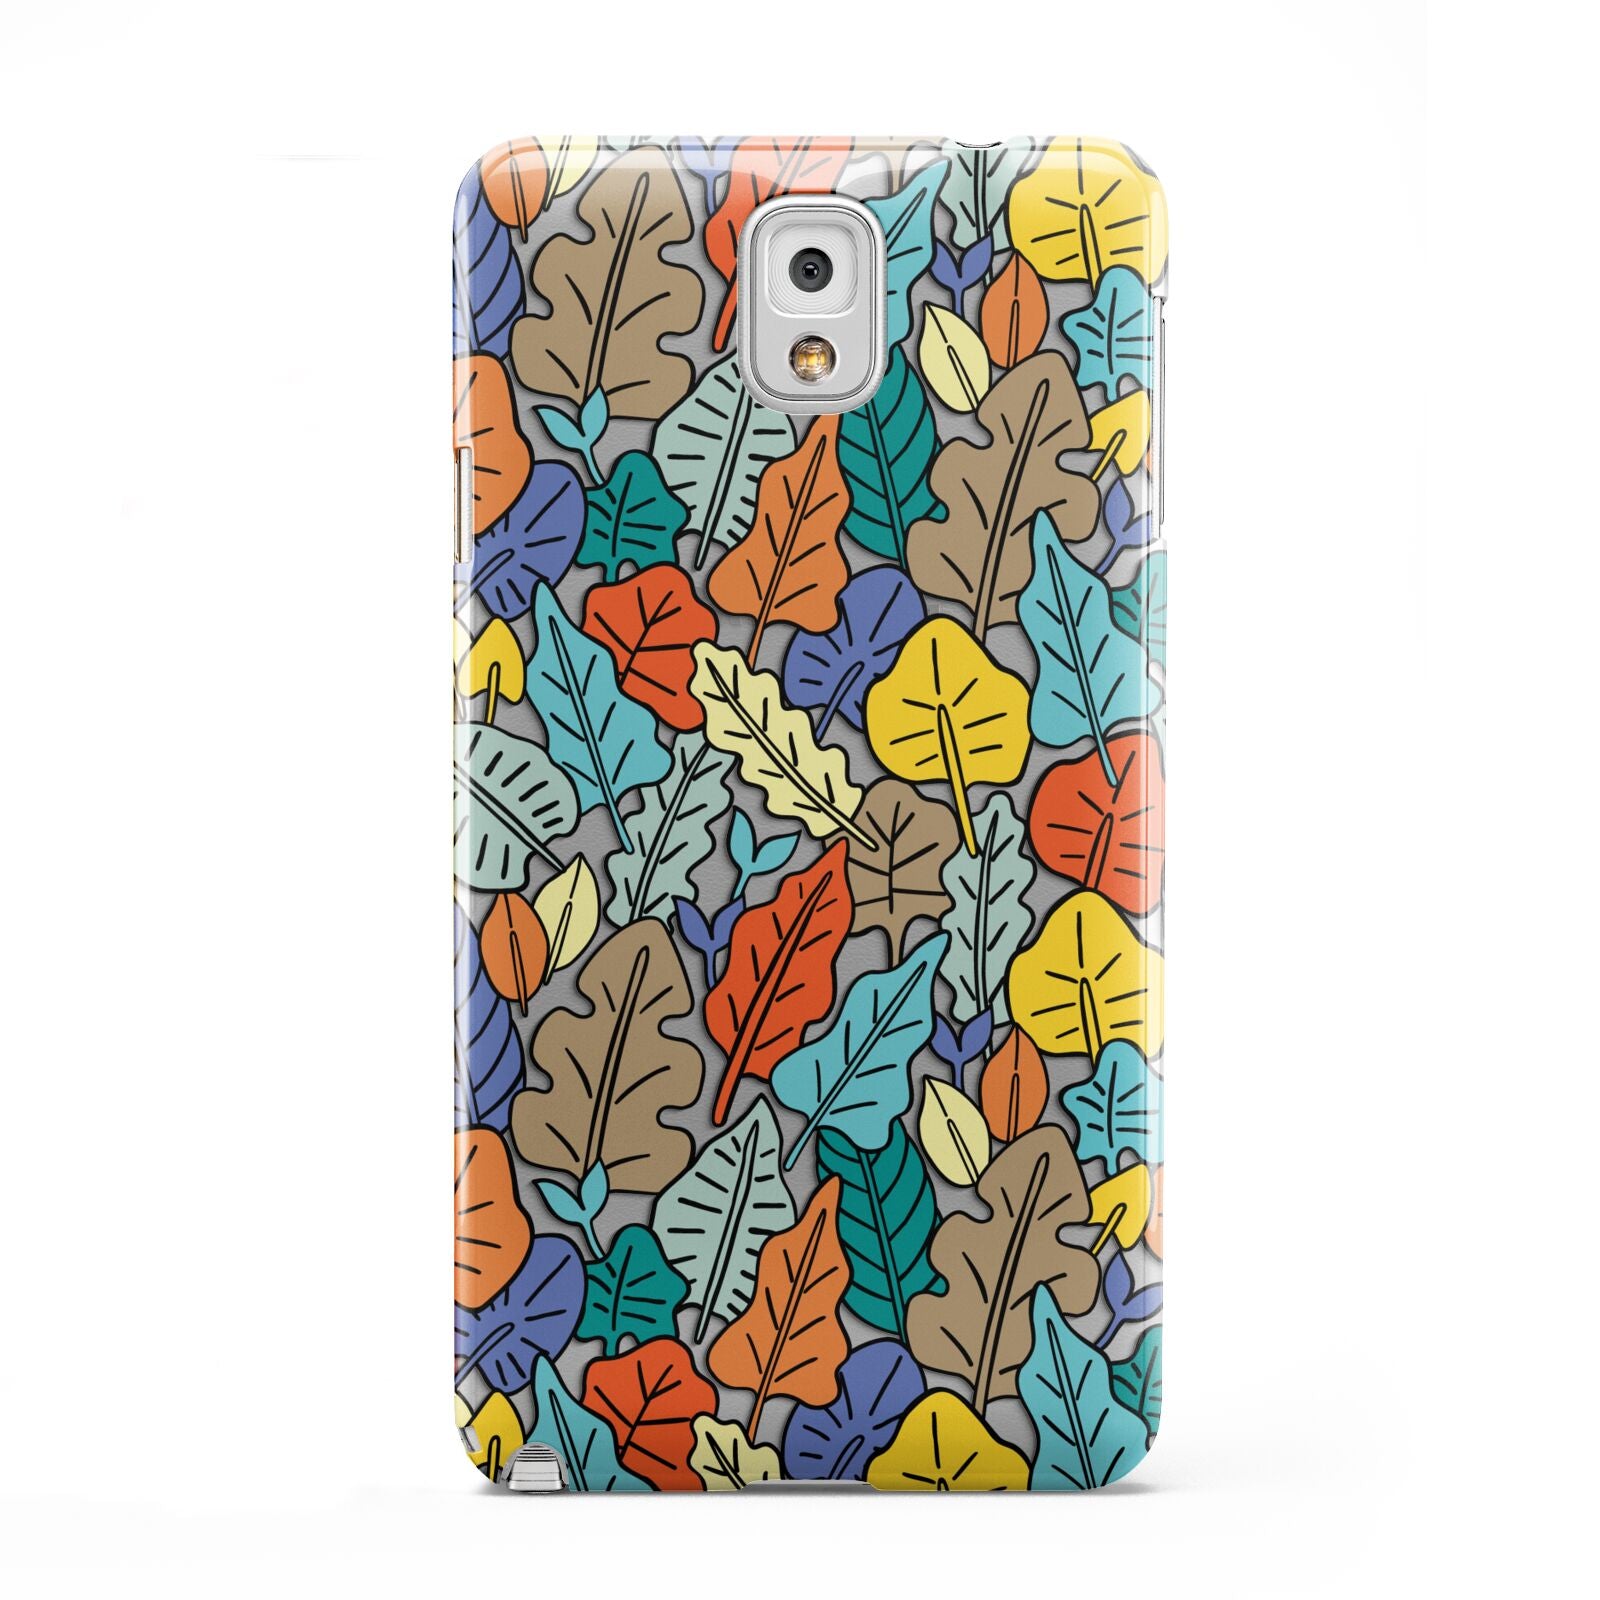 Autumn Leaves Samsung Galaxy Note 3 Case